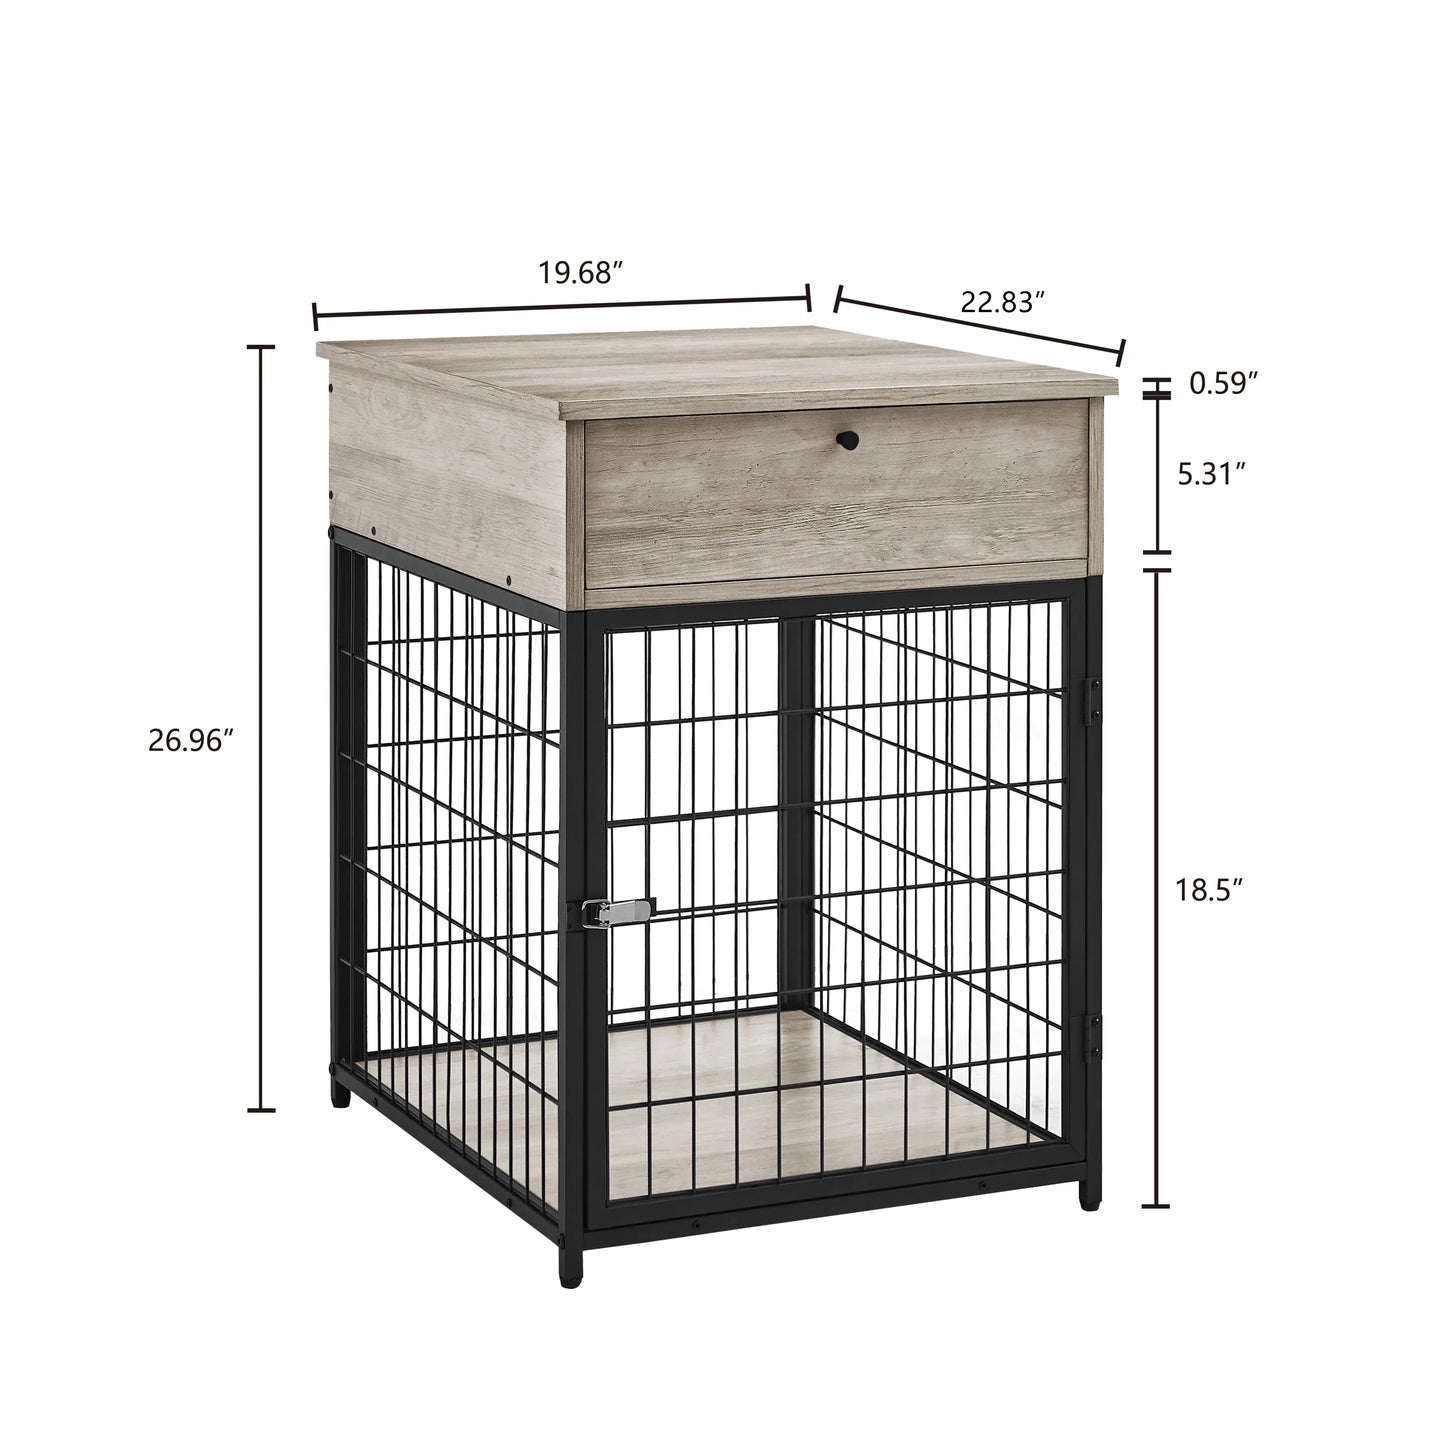 Wooden Crates for Small Dogs in Gray